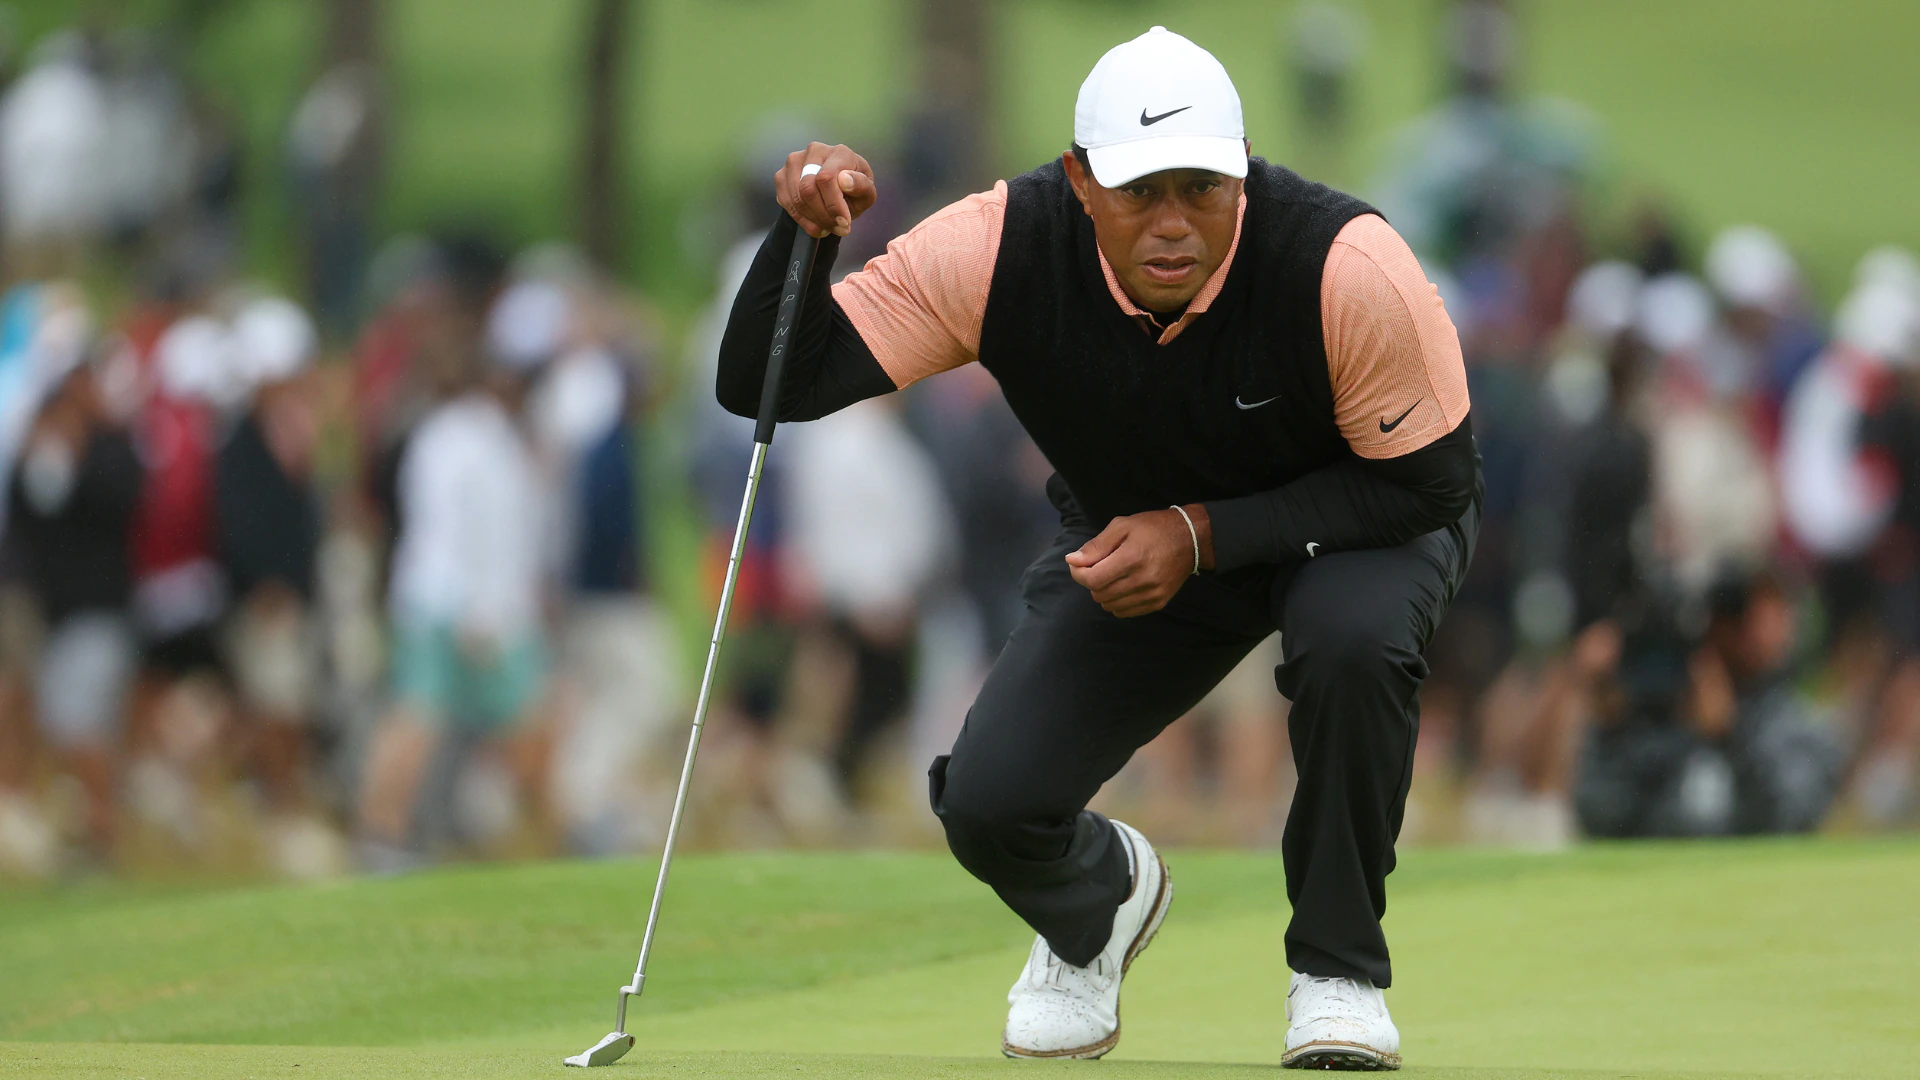 New photo shows Tiger Woods’ injured right leg without leg sleeve